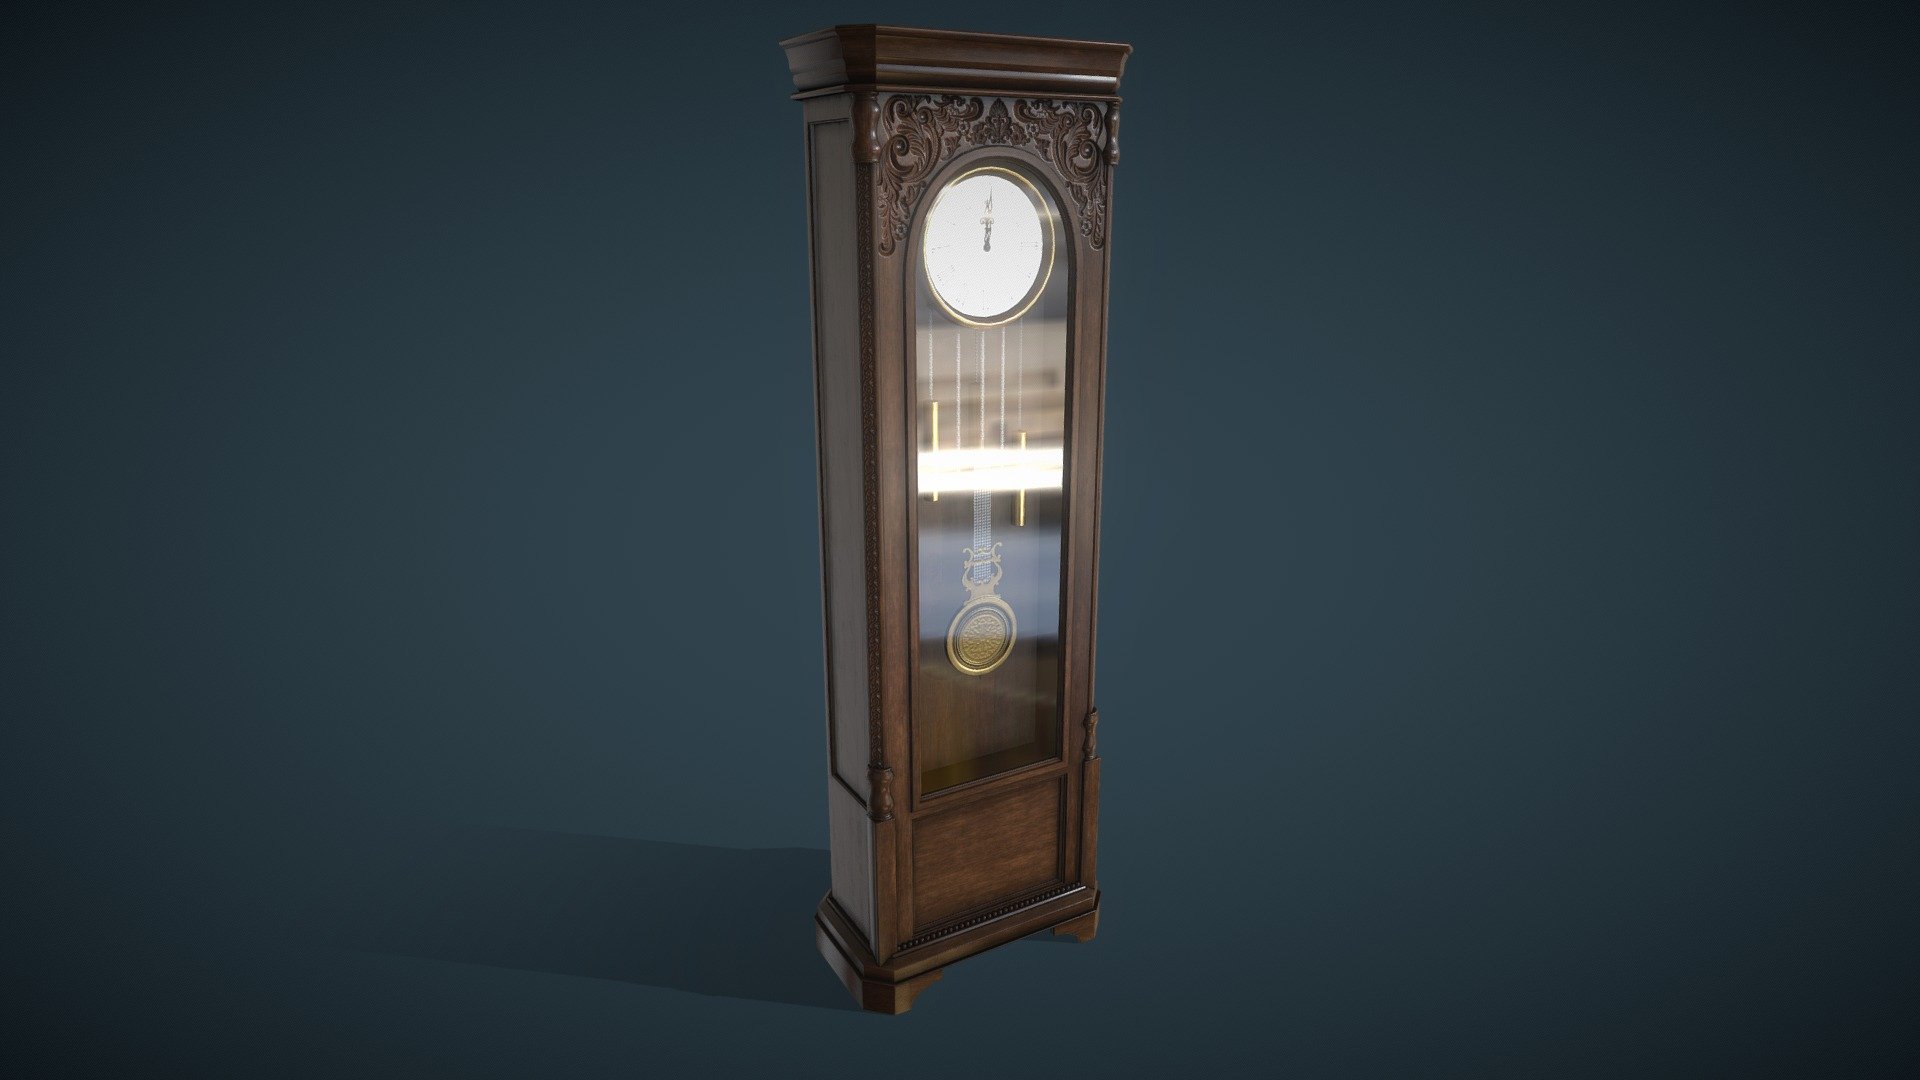 Grandfather Clock

Assets:
Grandfather Clock
57.1cm Width(X), 32.3cm Length(Y), 175cm Height(Z)
22.5in Width(X), 12.7in Length(Y), 68.8in Height(Z)
Polycount: 5,669
Triangle count: 10,462
Vertex count: 5,942
Bones: 4

Included model formats: BLEND(Including Scene), ABC, DAE, FBX, GLTF(Including Scene), OBJ, STL

Materials:
Includes 2 Materials/Texture sets
Grandfather_Clock Mat
Grandfather_Clock_Glass Mat

Textures:
Included texture types: Base Color, Diffuse, Ambient Occlusion, Glossiness, Height, Metallic, Normal Map (OpenGL), Normal Map (Direct-X), Roughness, Specular-Level, Emissive
Included Texture Sizes: 1024px, 2048px, 4096px

Average Texel Density:
5.12px/cm @ 1024x1024 image resolution
10.24px/cm @ 2048x2048 image resolution
20.48 px/cm @ 4096x4096 image resolution

Please Contact Me If You Have Any Questions Or Business Inquiries At bsw2142@gmail.com You Can Fill A Custom Work Request For A Quick Quote From Me At https://forms.gle/66YjCgoQgk8eUsaK6 - Grandfather Clock - Buy Royalty Free 3D model by Brandon Westlake (@dr.badass2142) 3d model